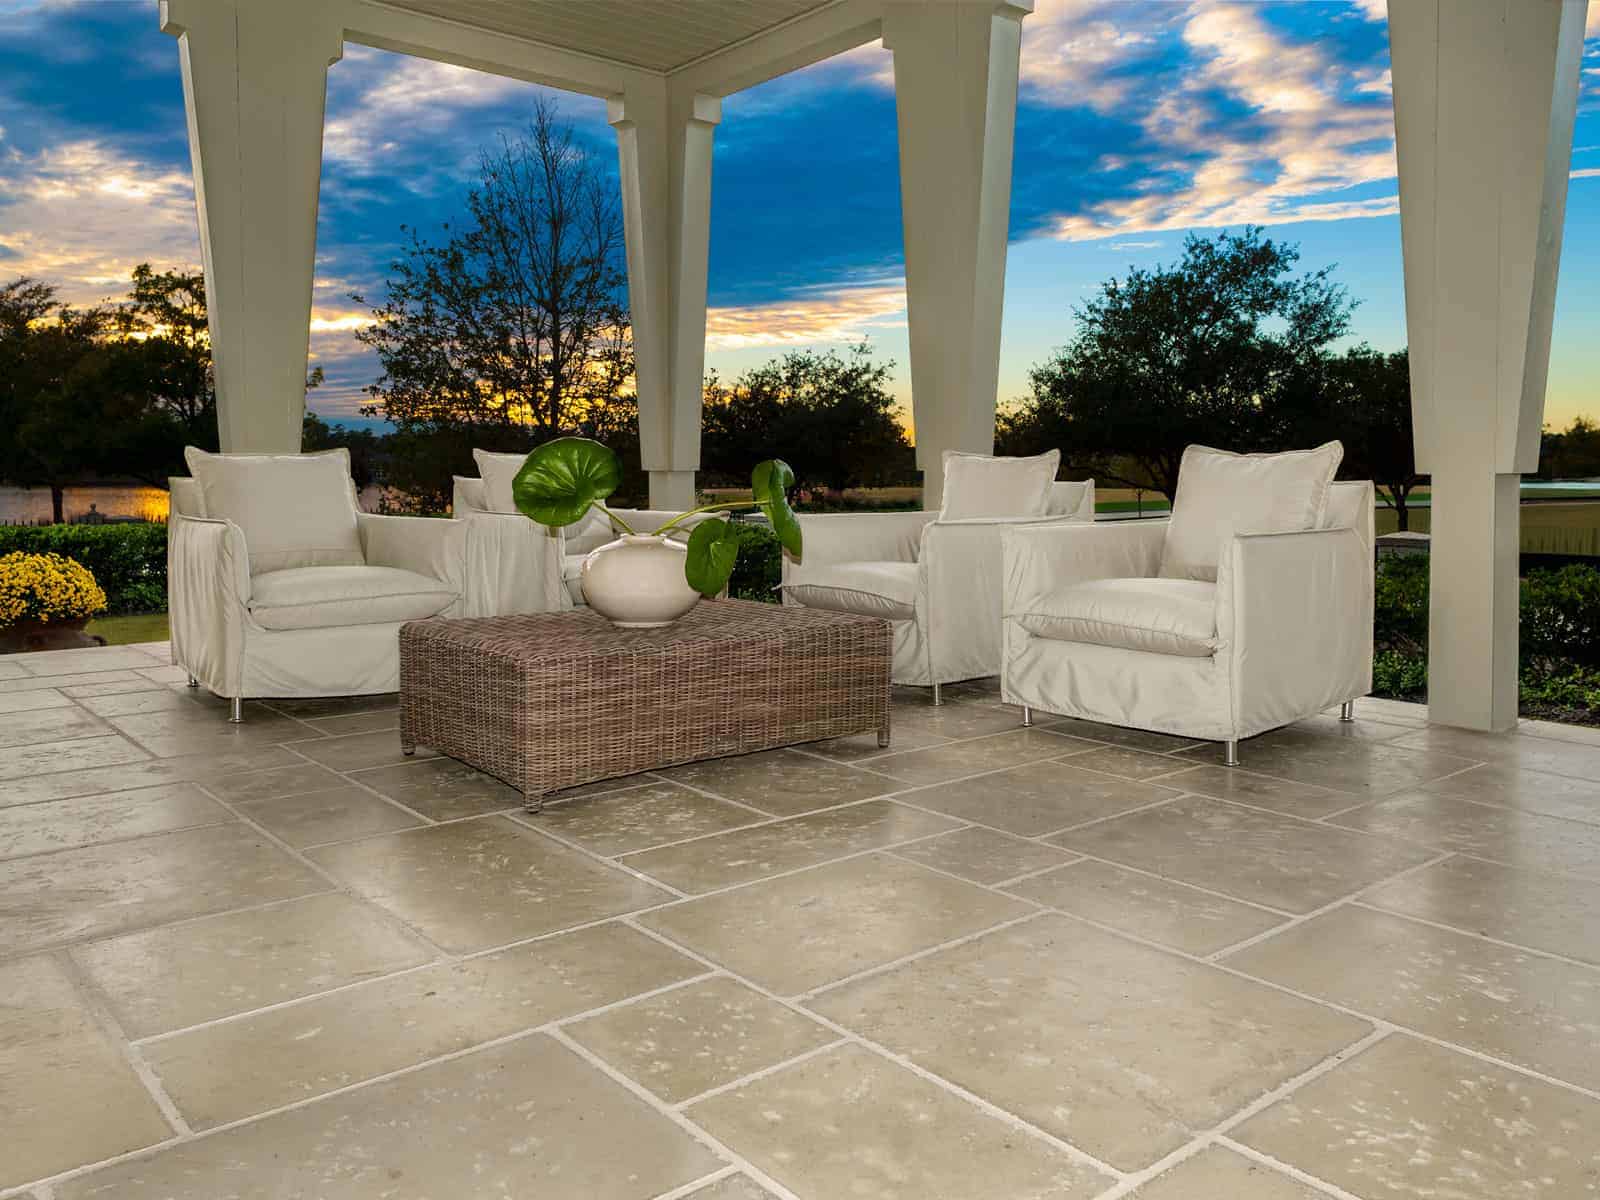 Large format concrete patio pavers mixed in a pattern with regular-sized pavers